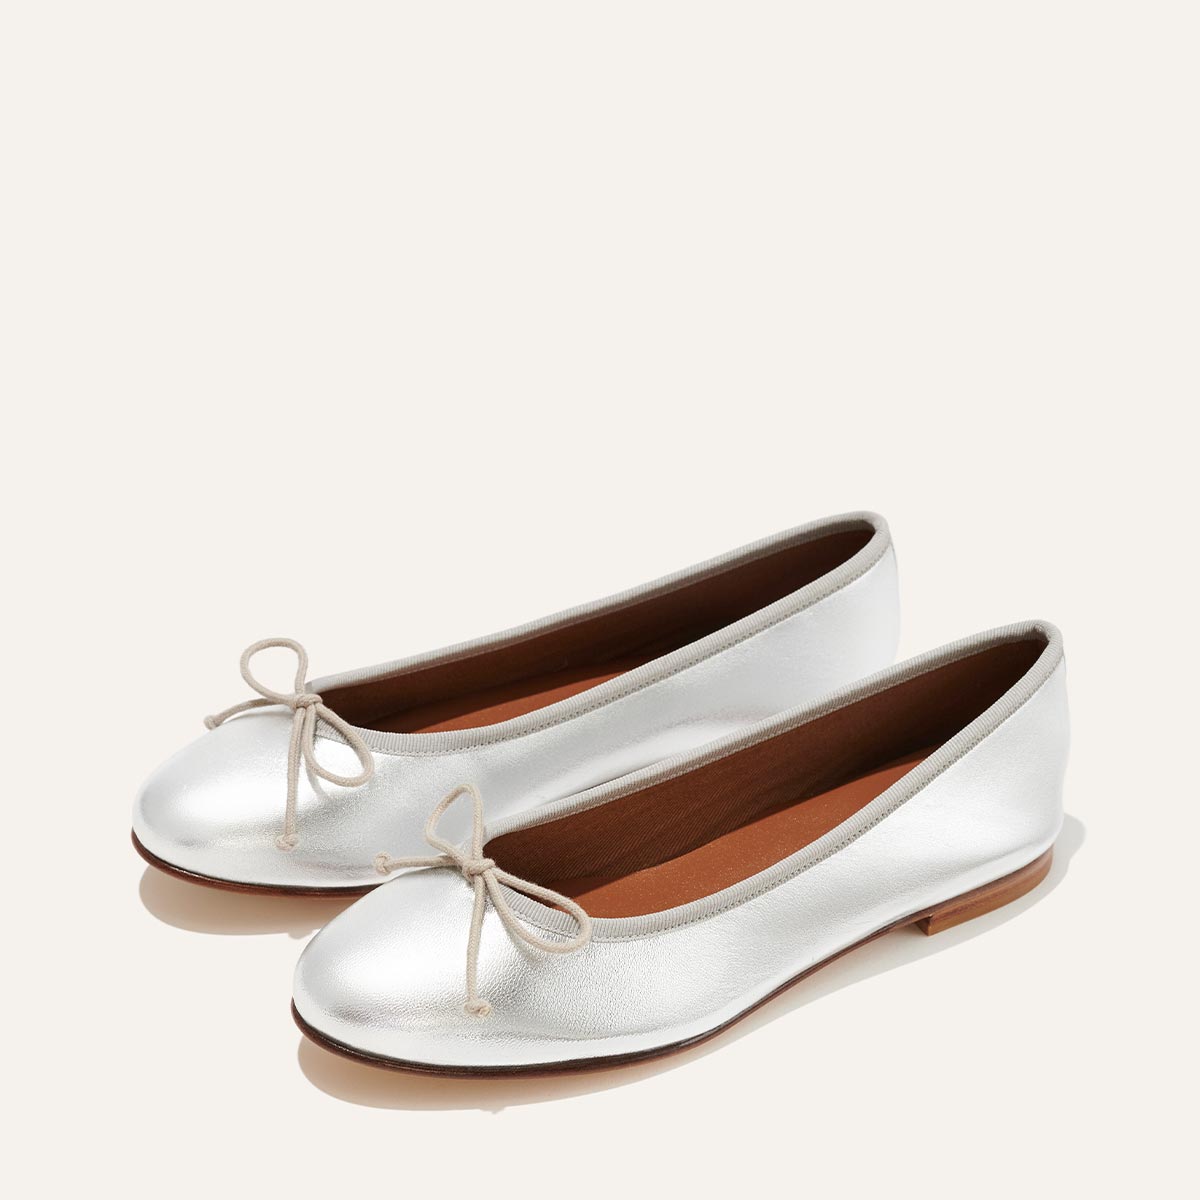 Margaux Ballet Flats - The Demi - Silver Nappa